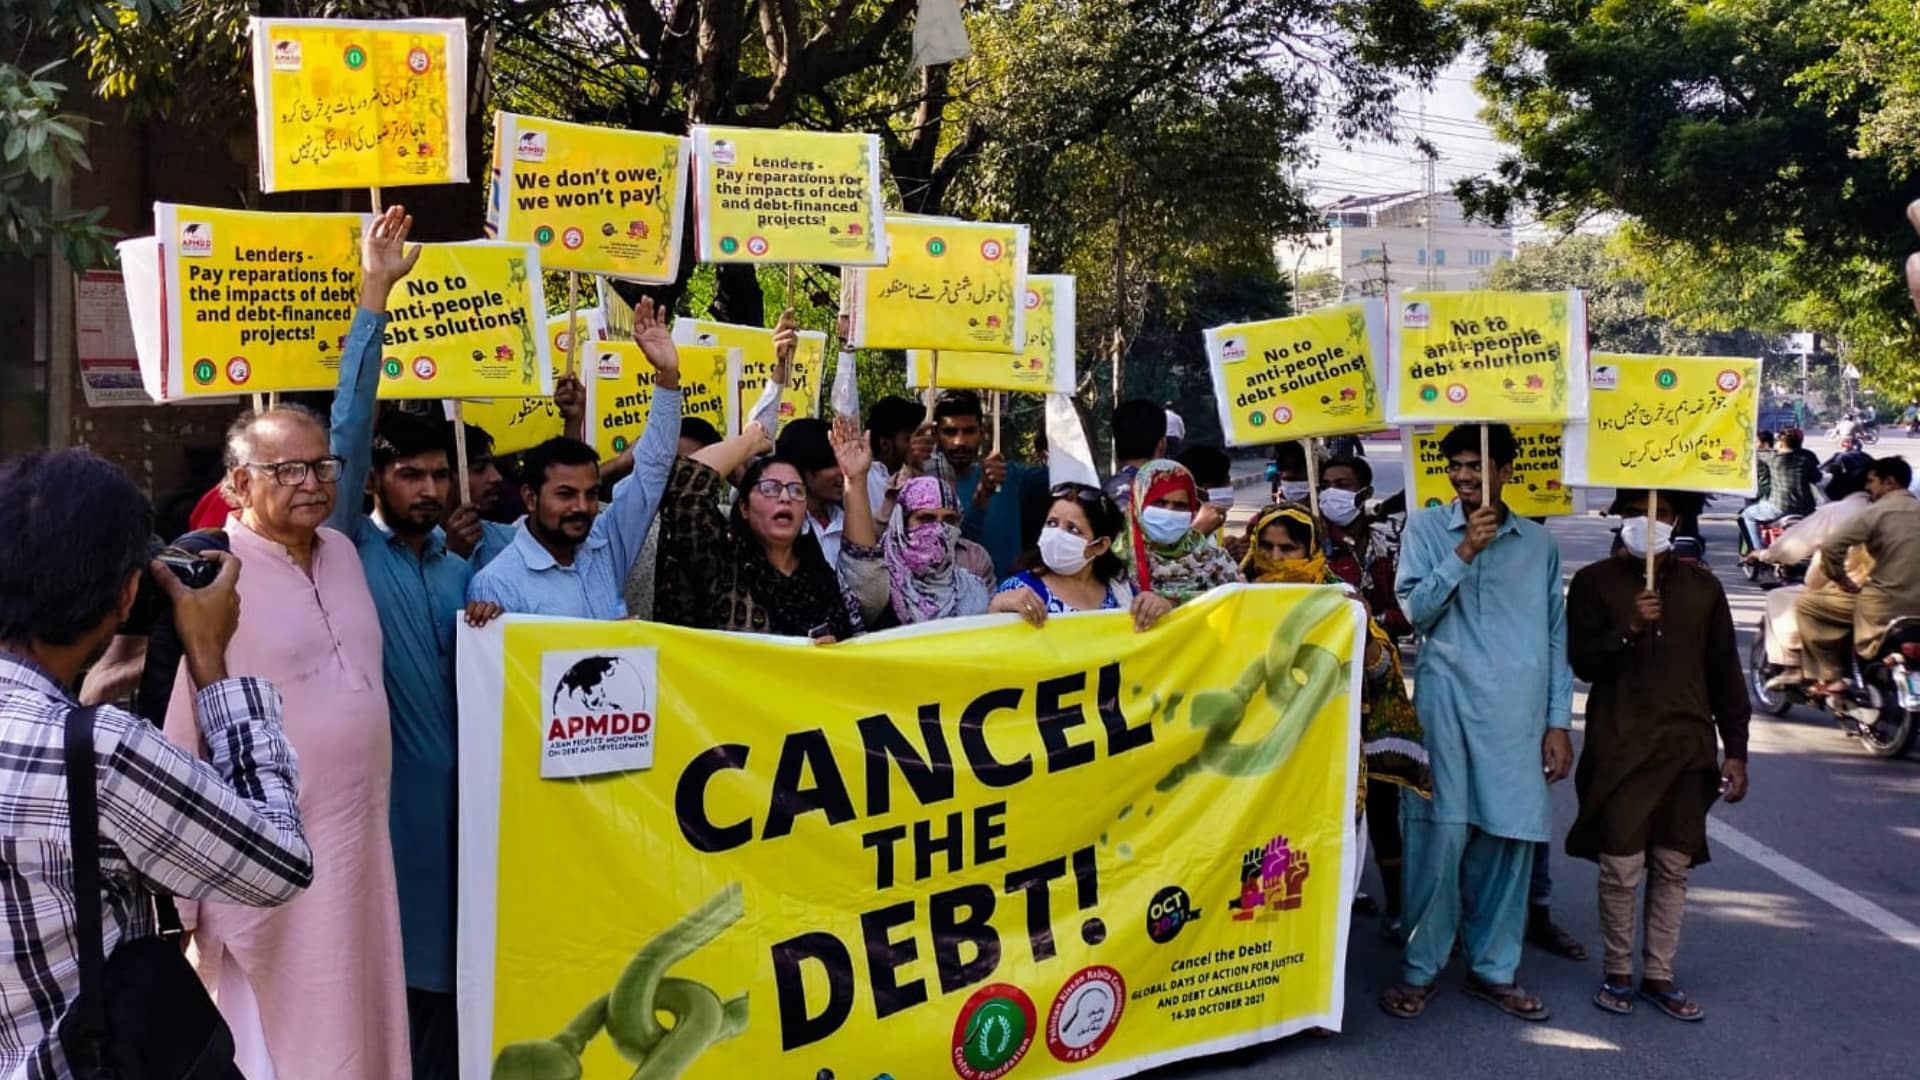 A global call for debt cancellation